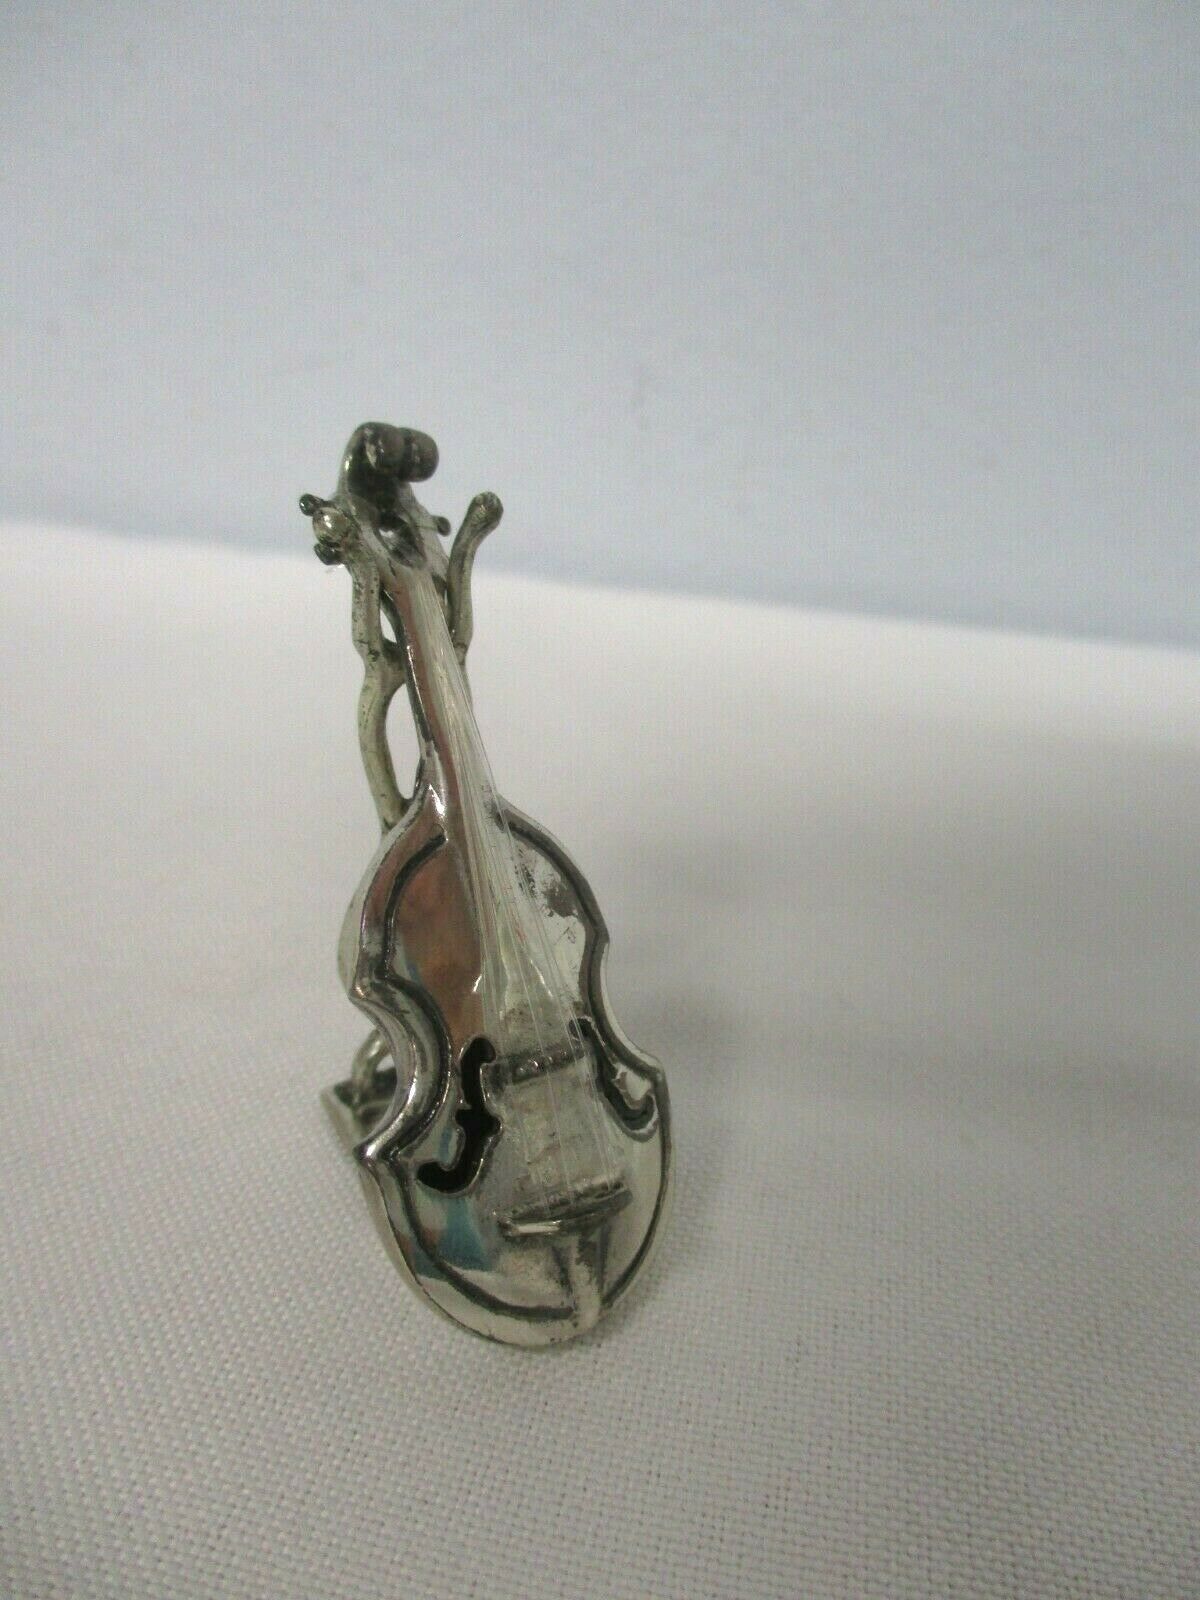 VINTAGE ITALY 925 STERLING SILVER DOLLHOUSE MINIATURE CELLO INSTRUMENT w STAND